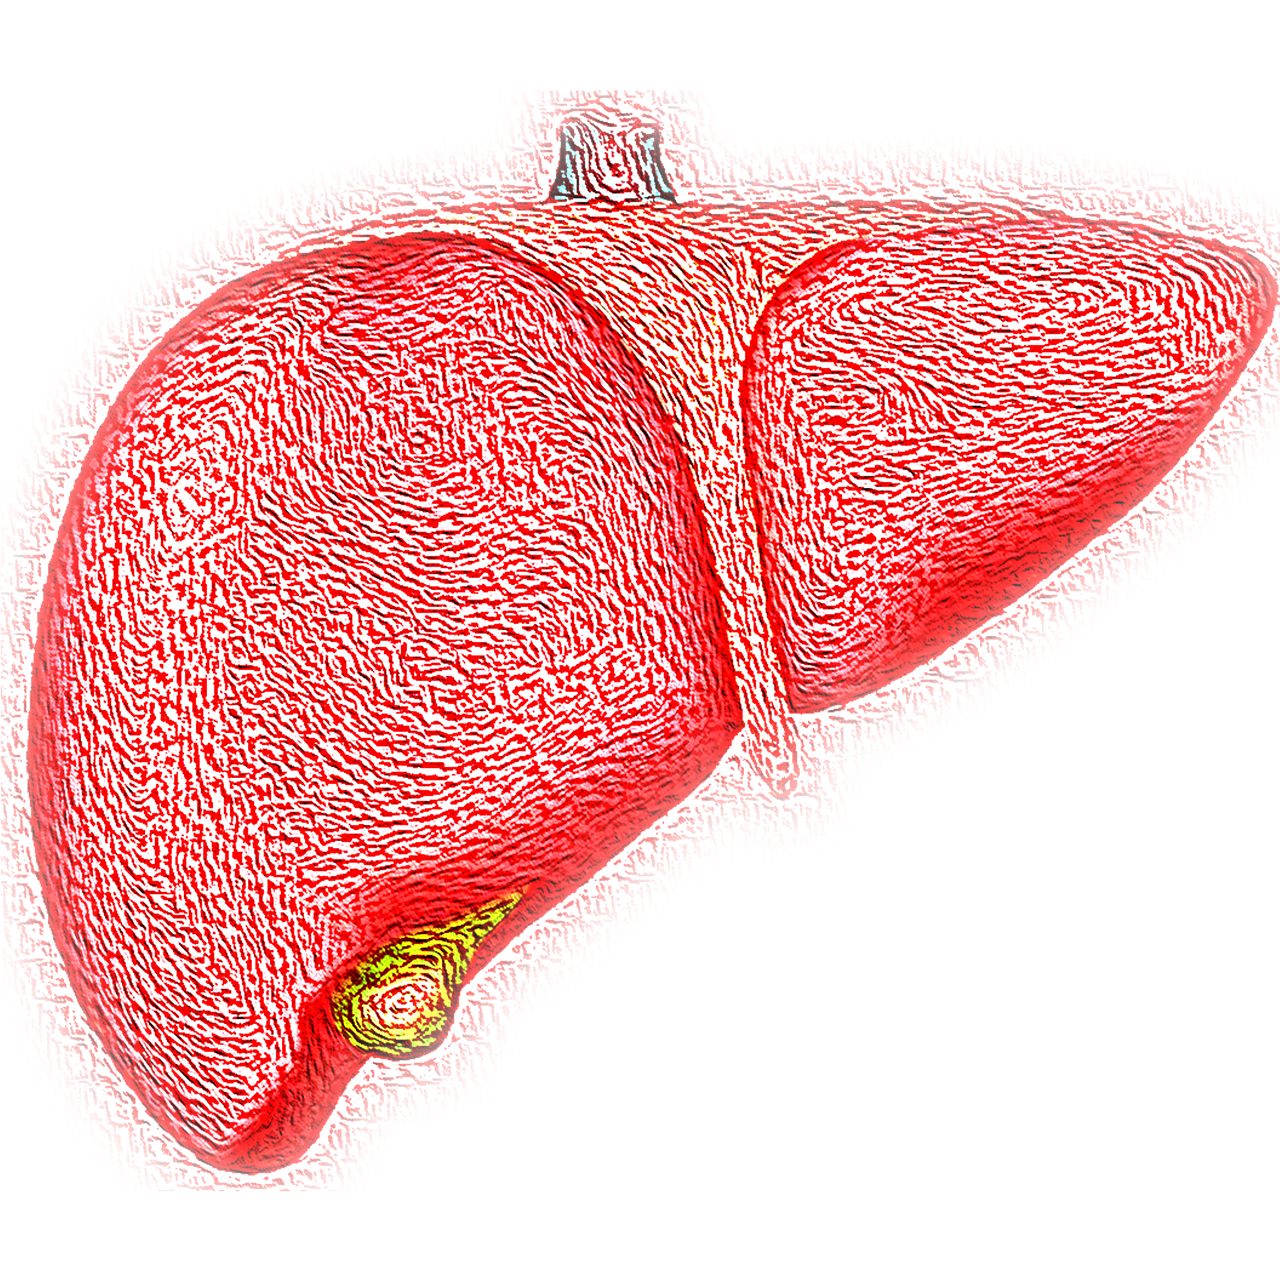 Liver Health: Caring for the main filter of the body